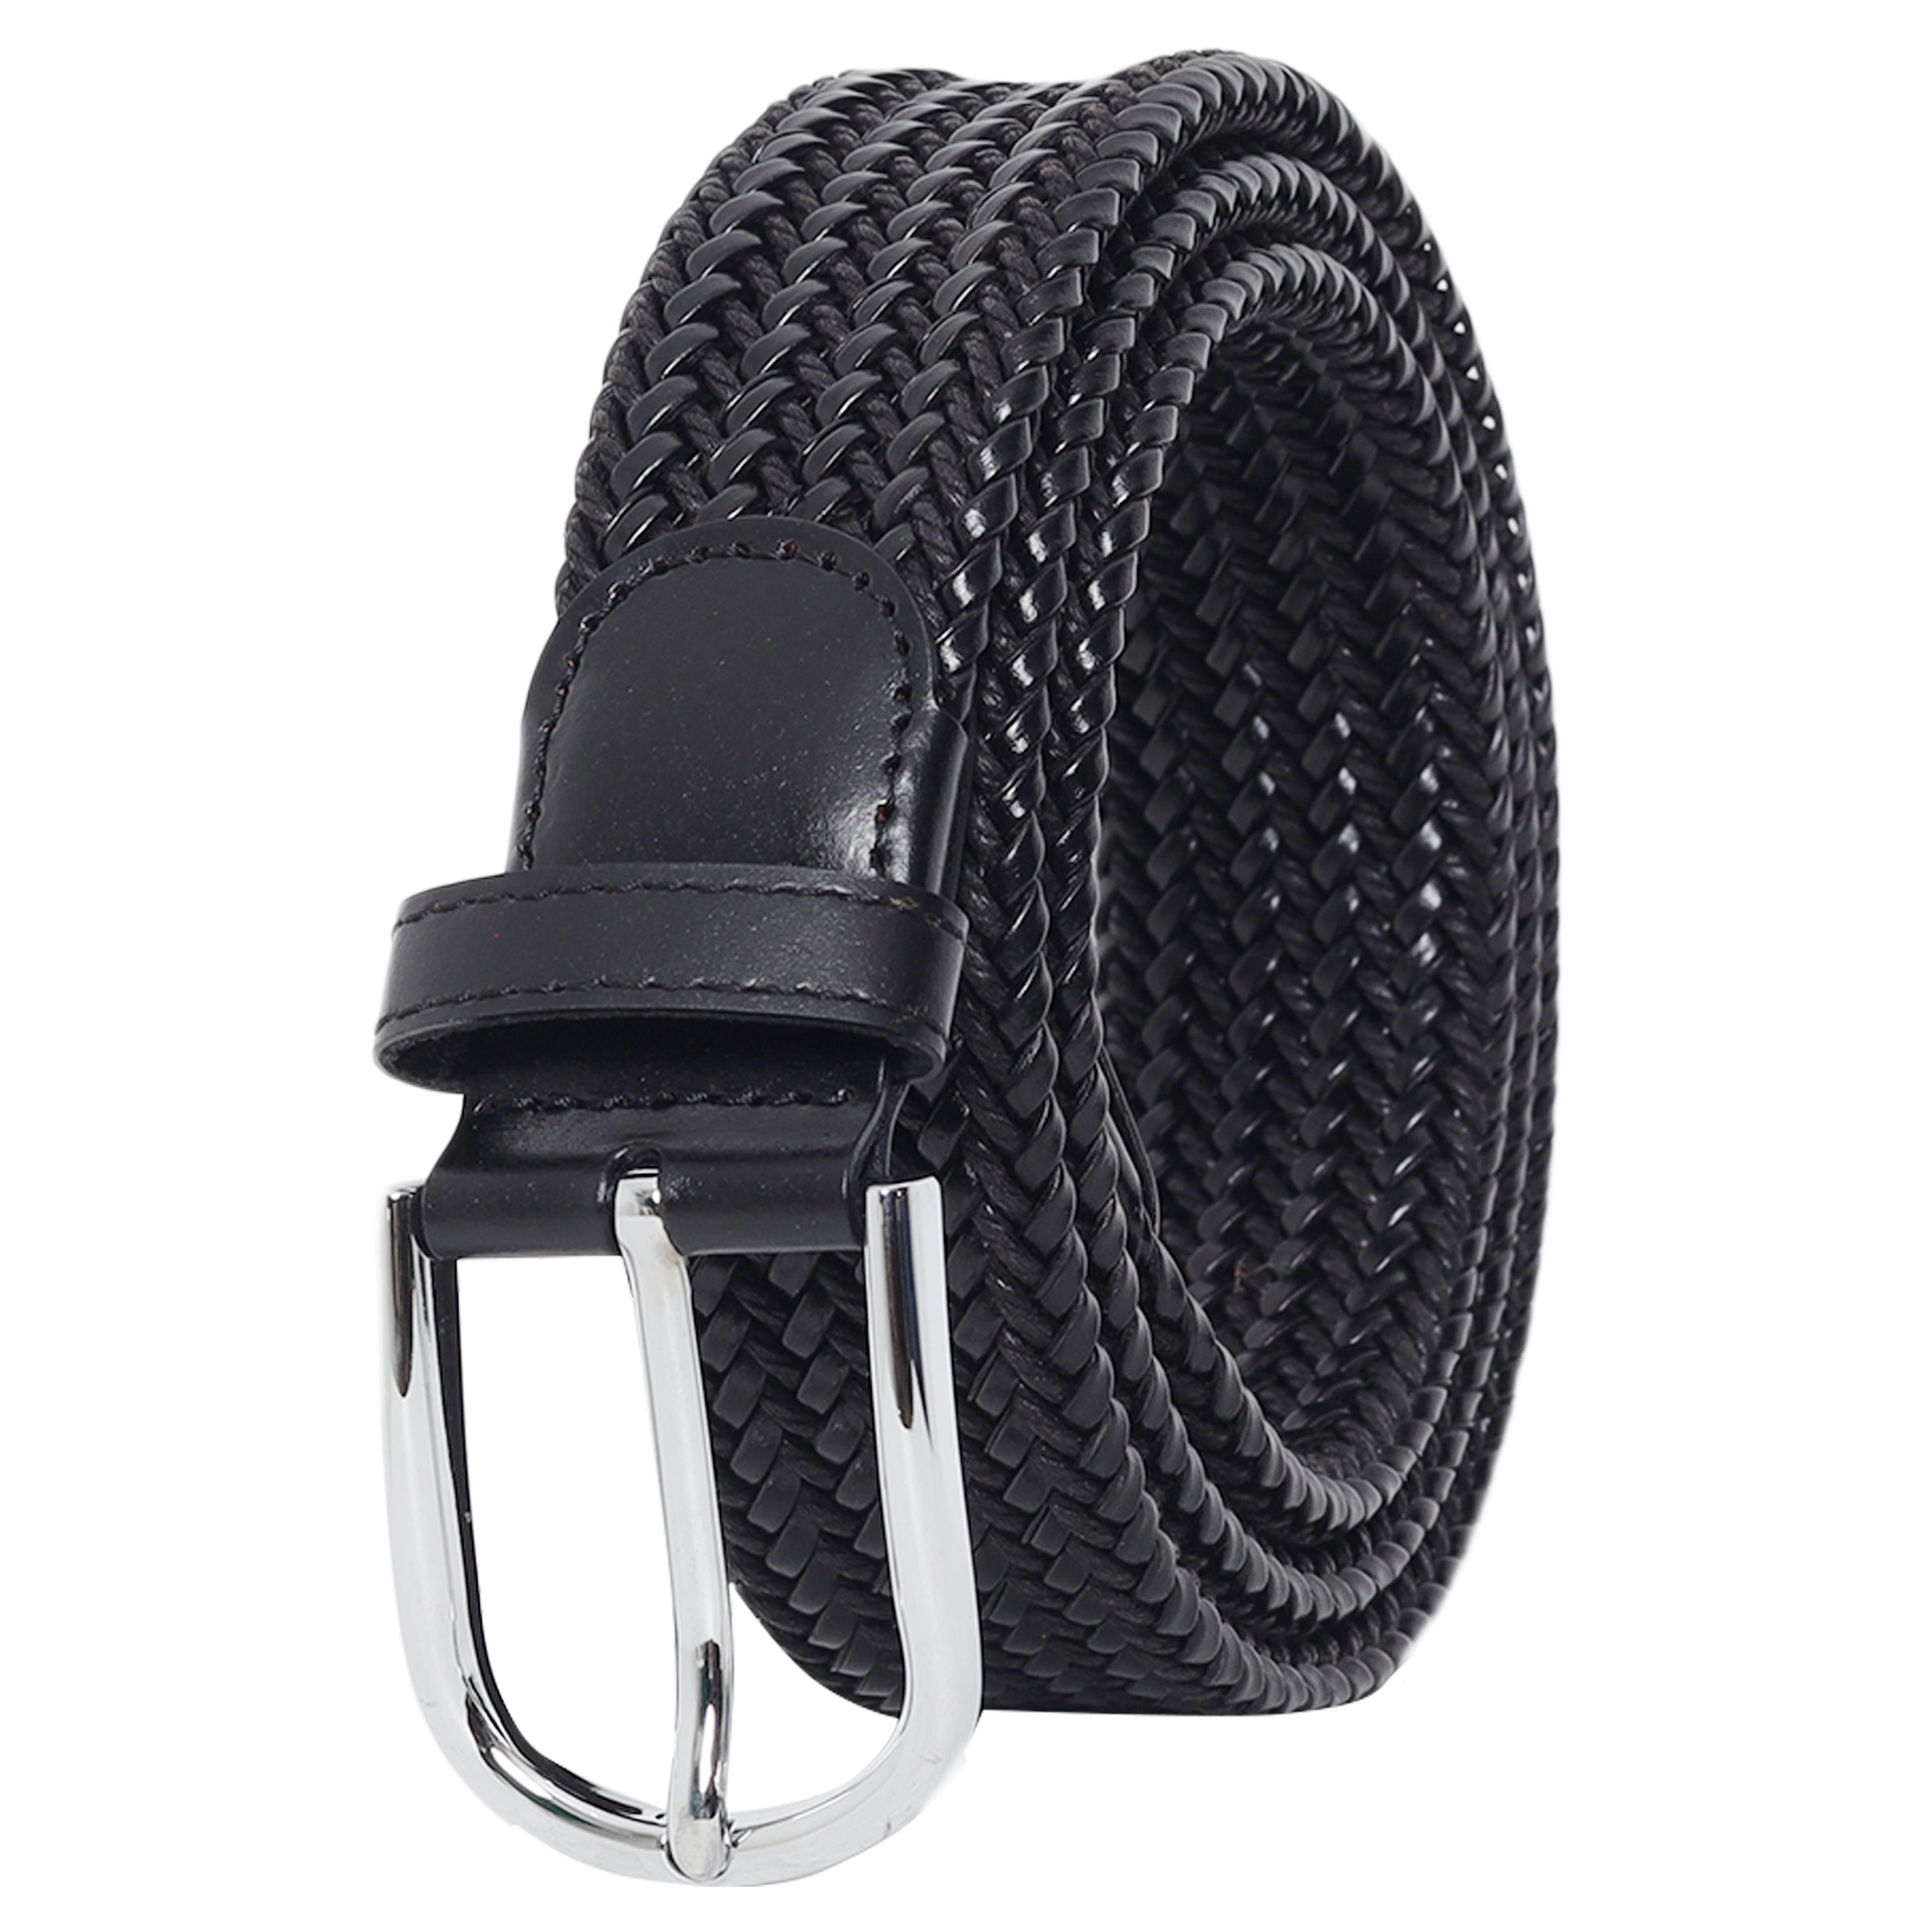 Bulchee Men's Cord and Leather Woven Belt BUL2225/26B